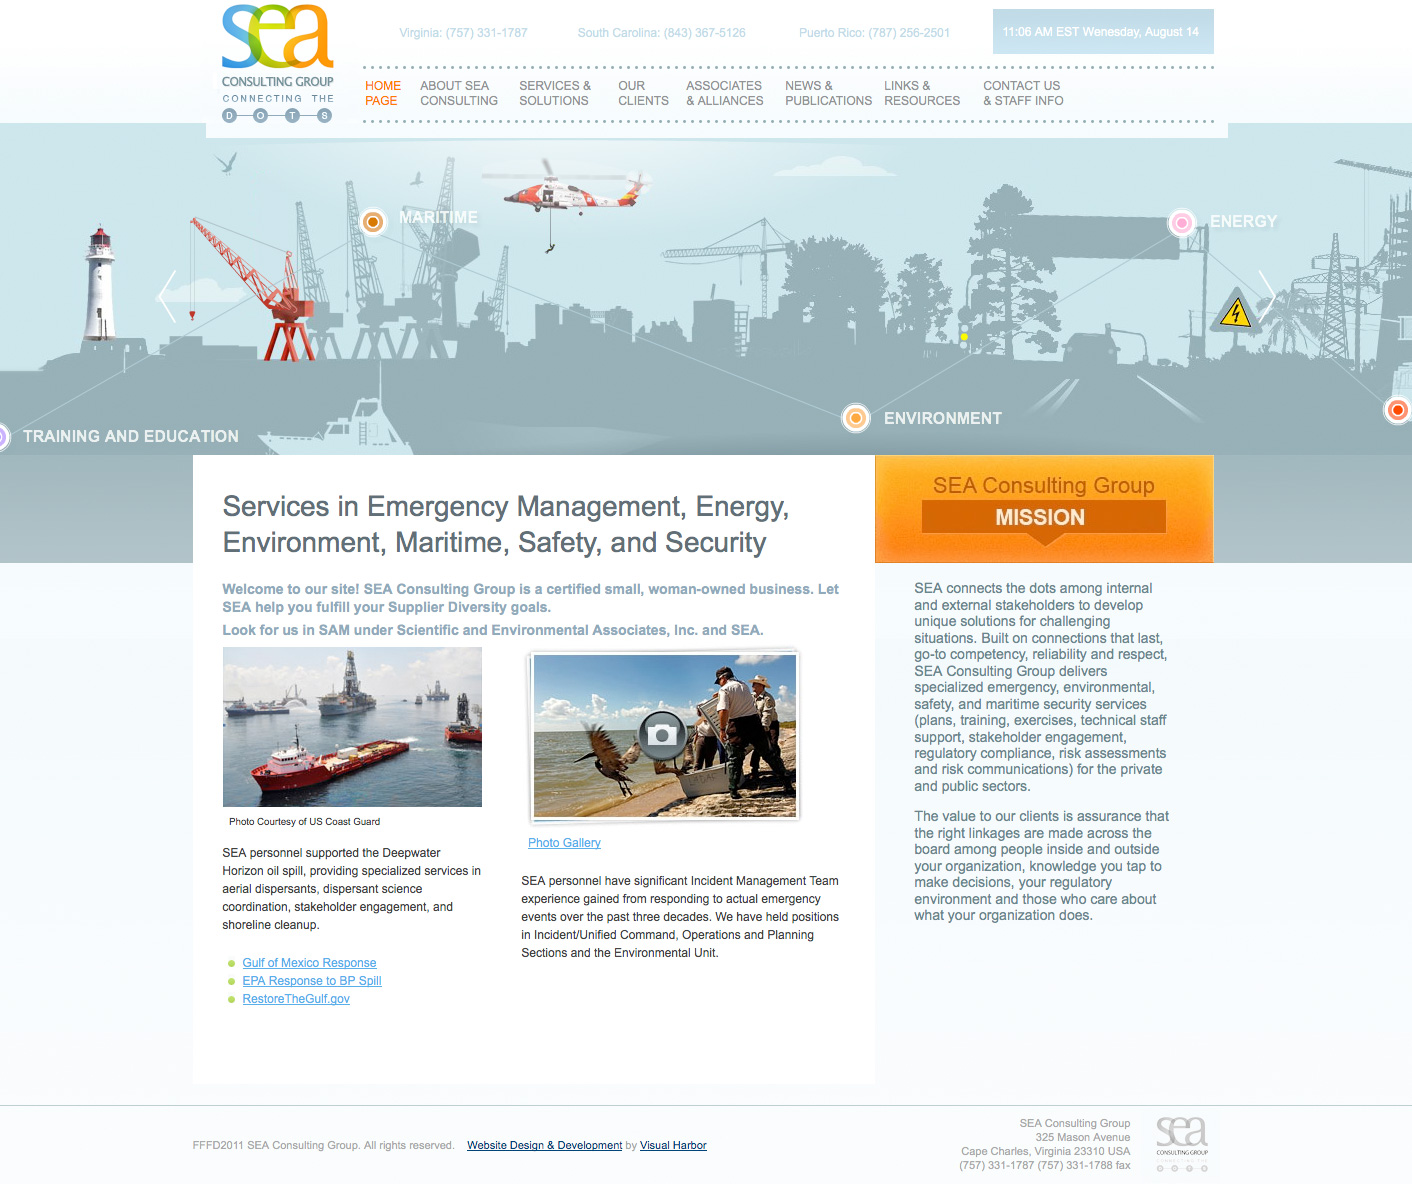 SEA Consulting Group